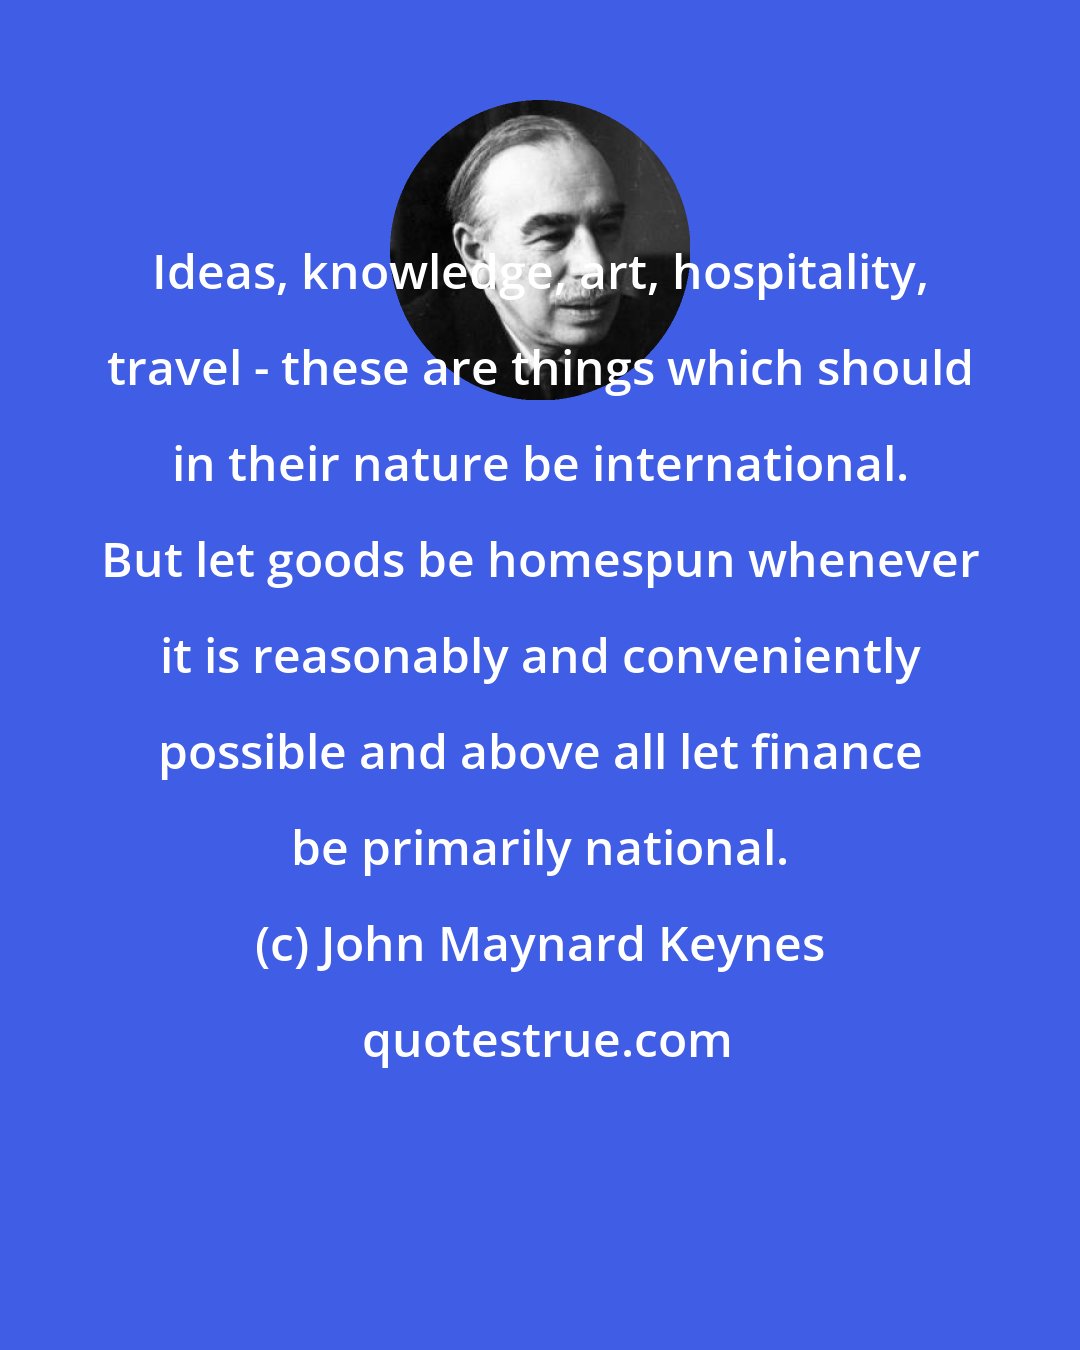 John Maynard Keynes: Ideas, knowledge, art, hospitality, travel - these are things which should in their nature be international. But let goods be homespun whenever it is reasonably and conveniently possible and above all let finance be primarily national.